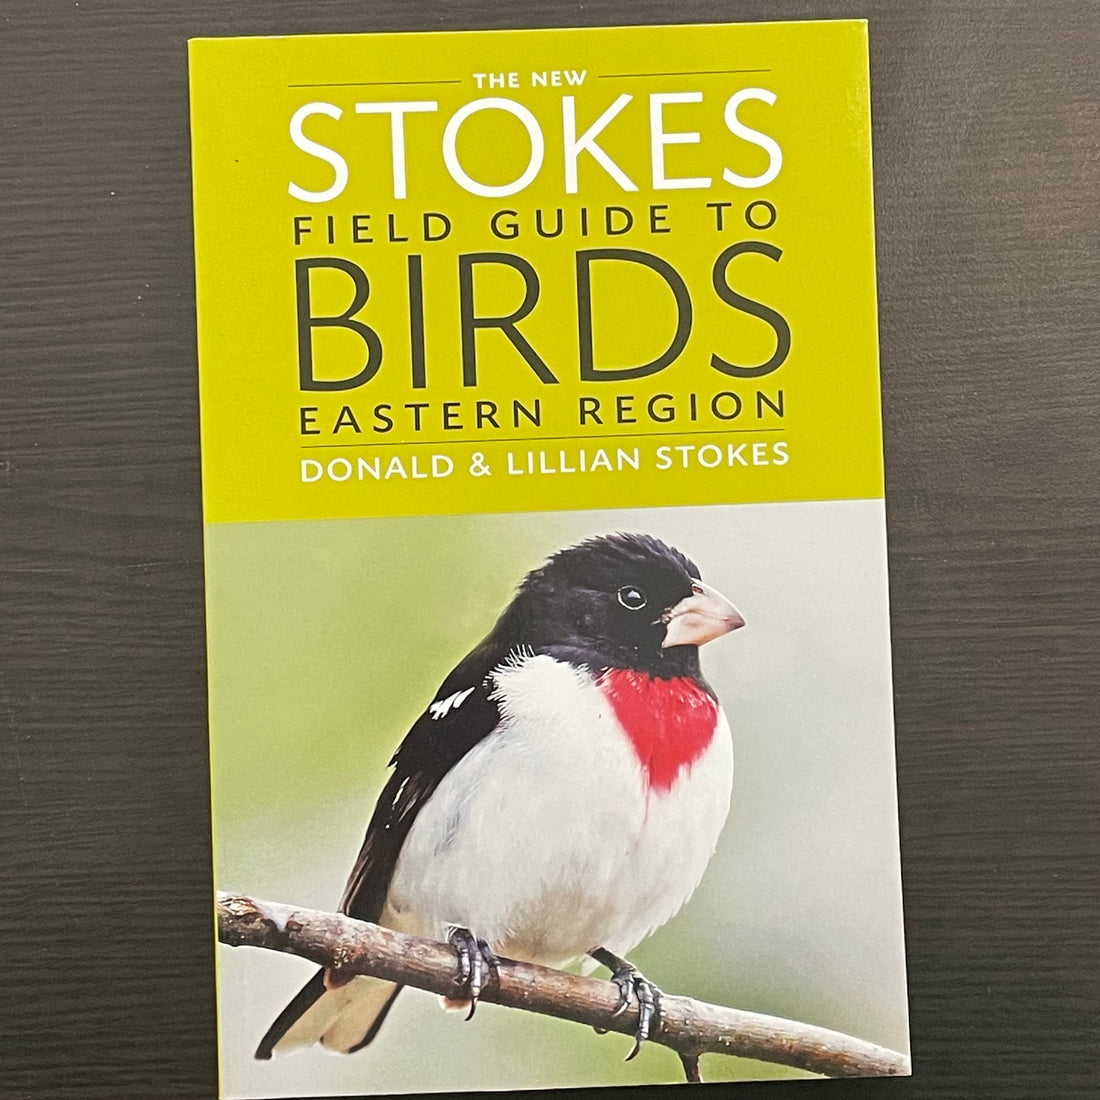 The New Stokes Guide to Birds: Eastern Region